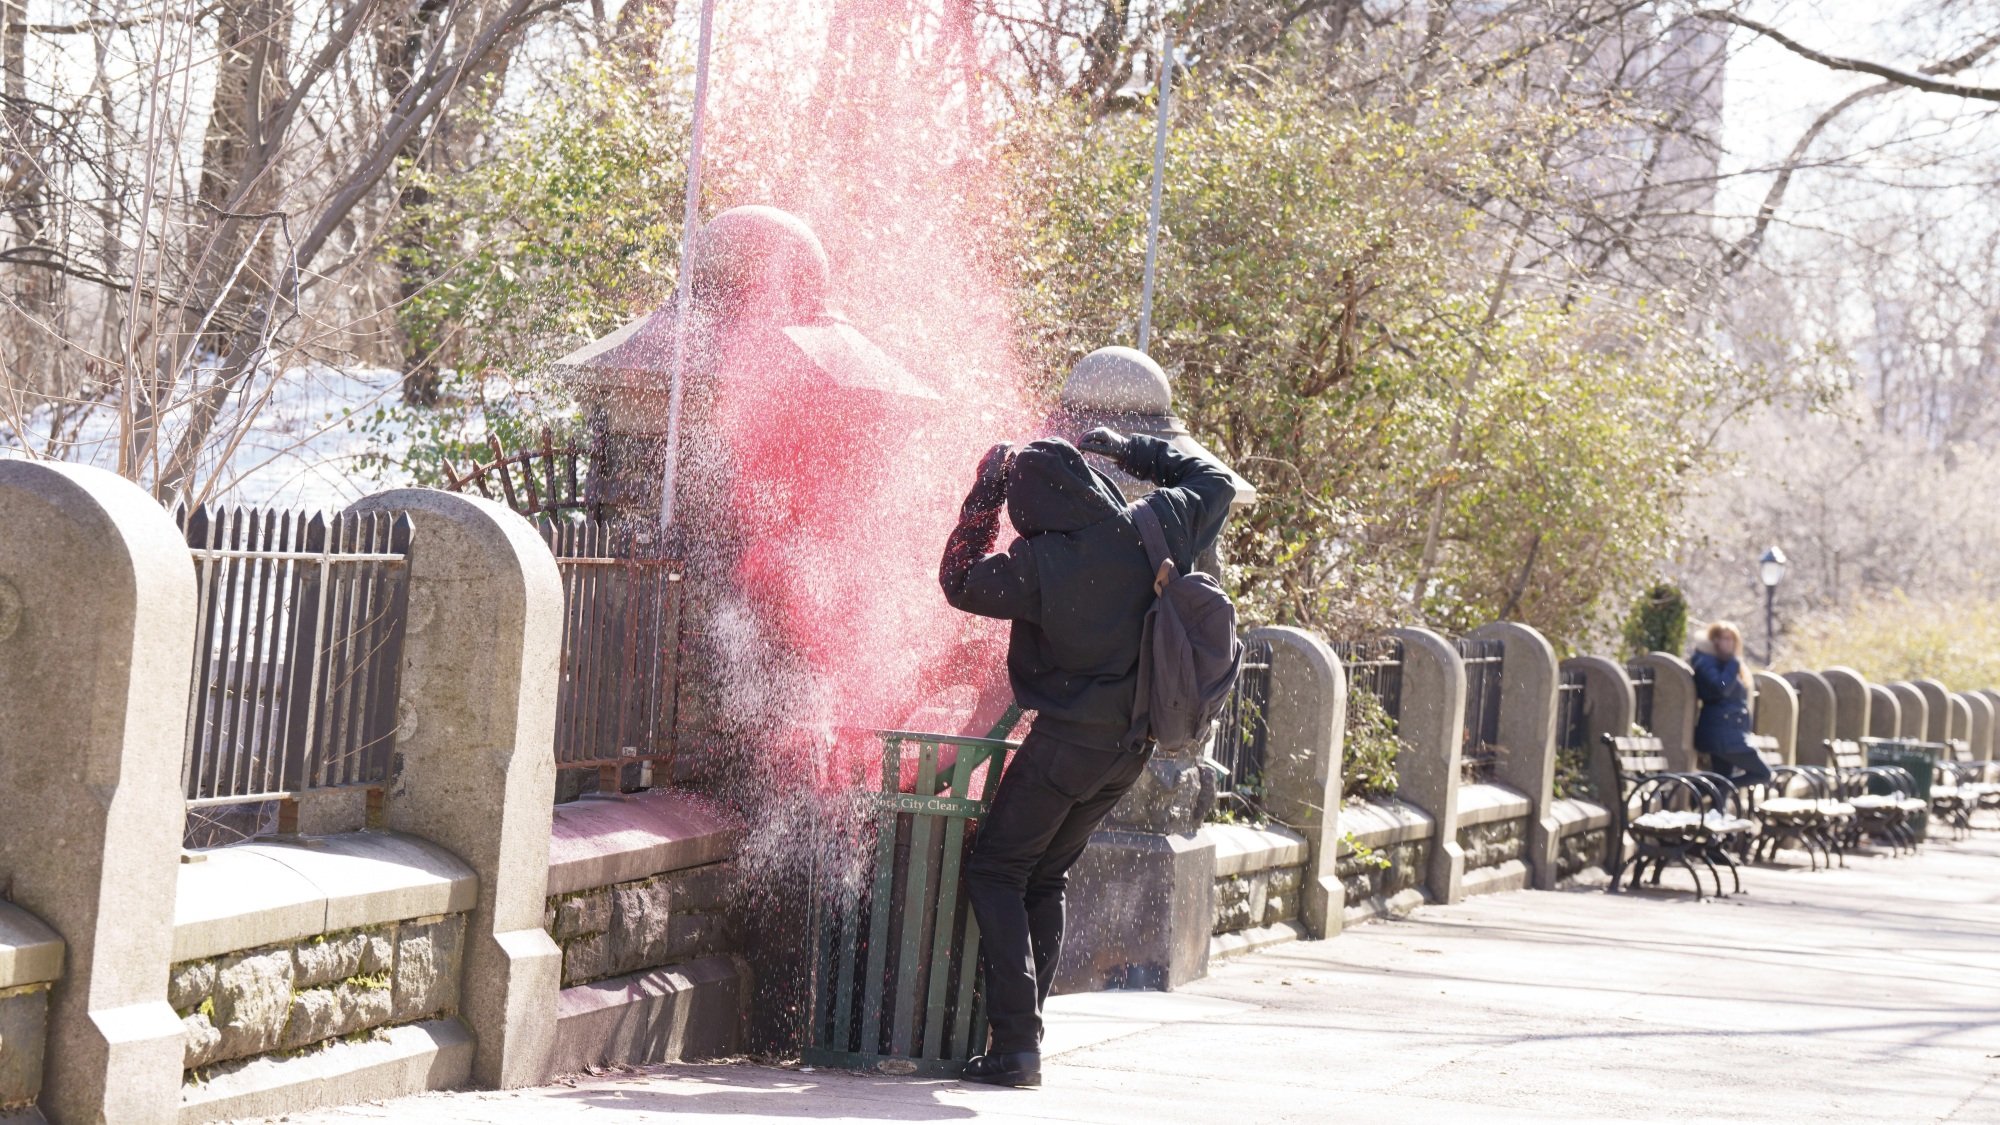 A man all in black recoils from a park trash can with red glitter exploding from it.